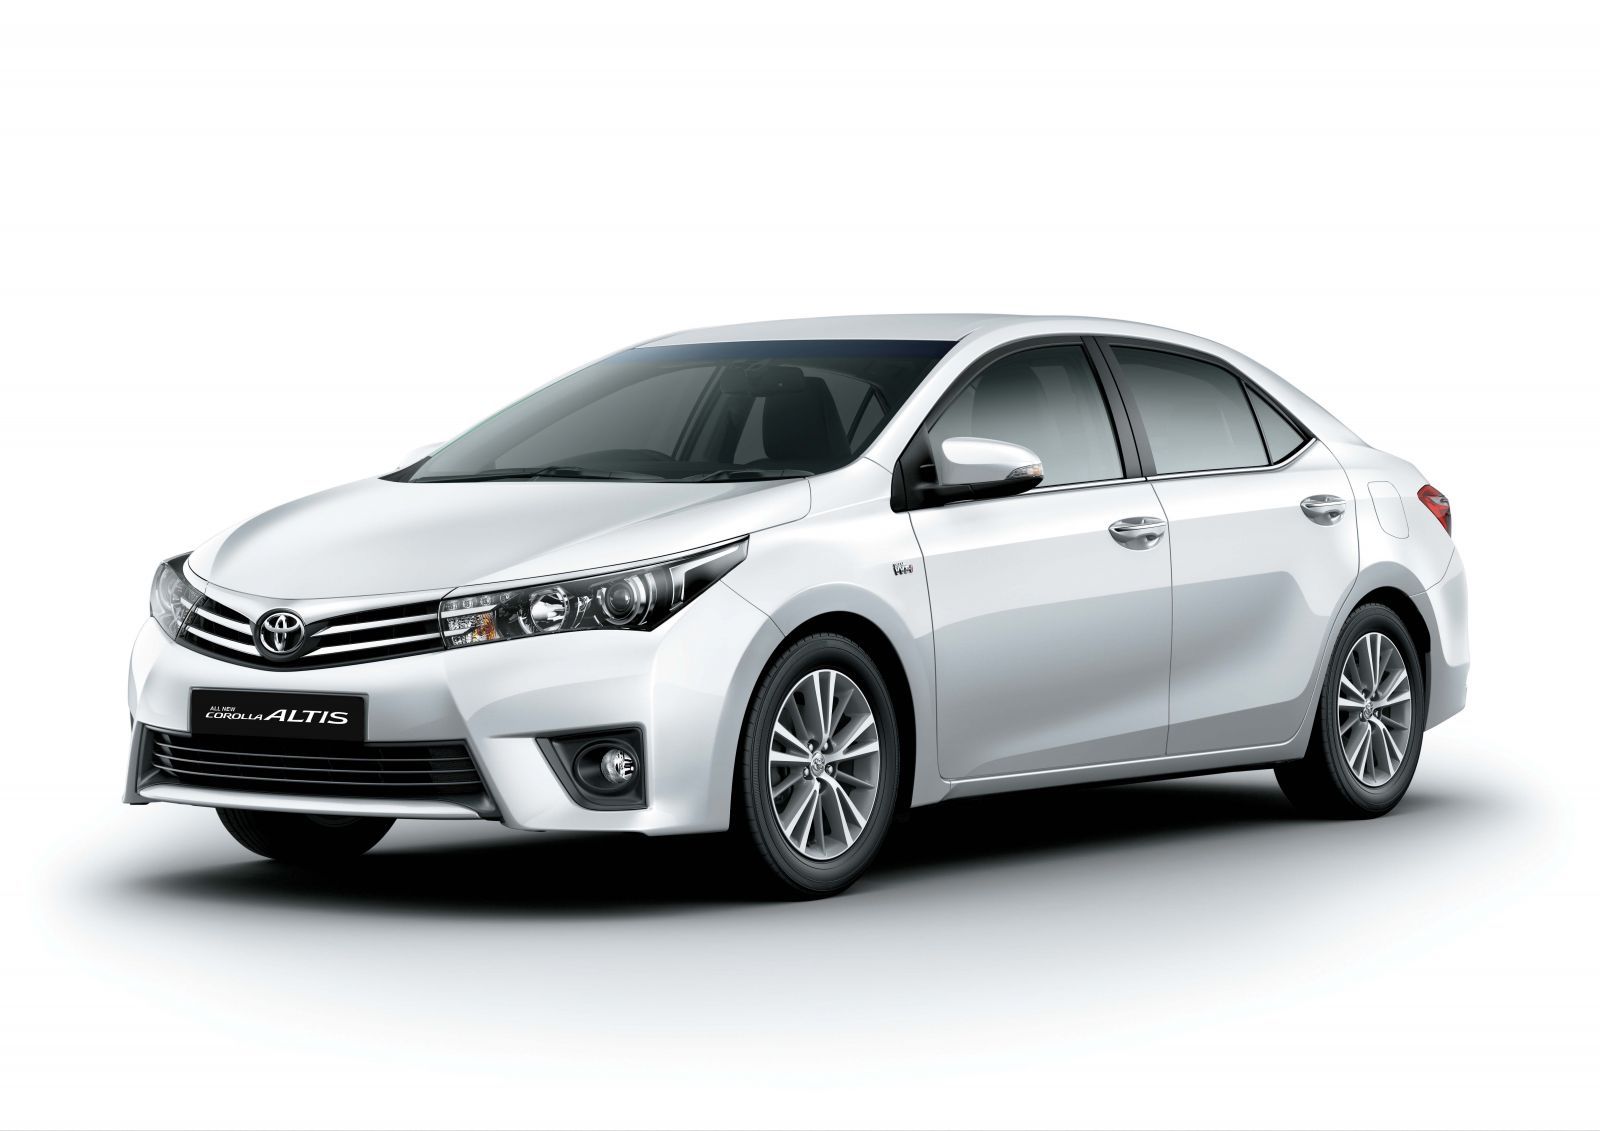 Toyota launches 11th gen Corolla Altis at INR 11,99,000